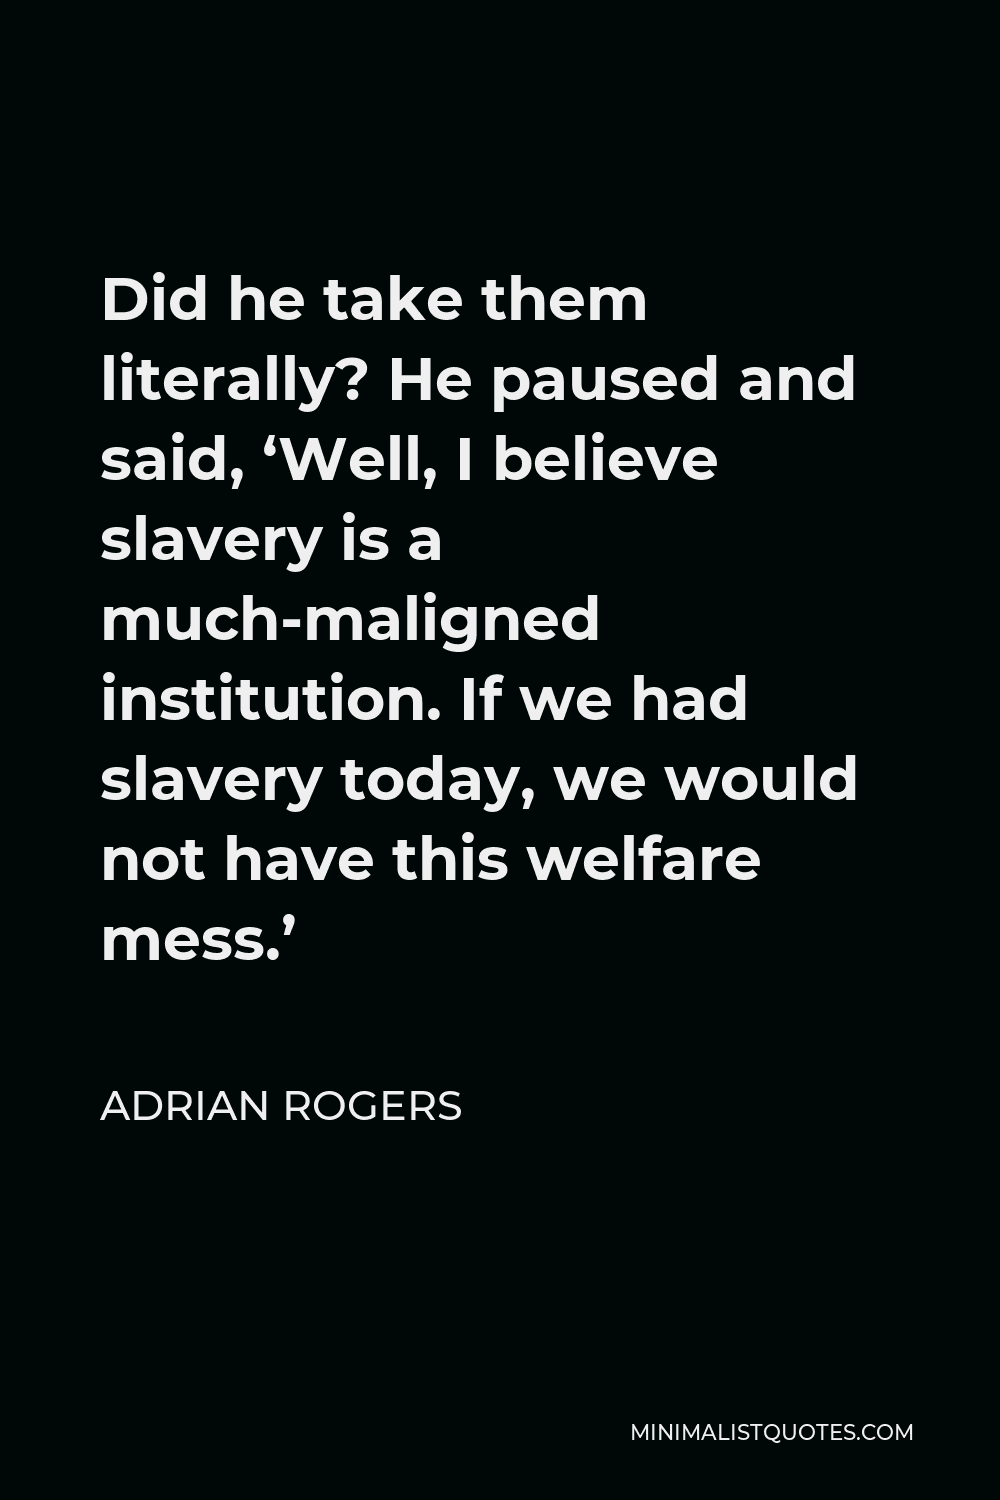 Adrian Rogers Quote - Did he take them literally? He paused and said, ‘Well, I believe slavery is a much-maligned institution. If we had slavery today, we would not have this welfare mess.’